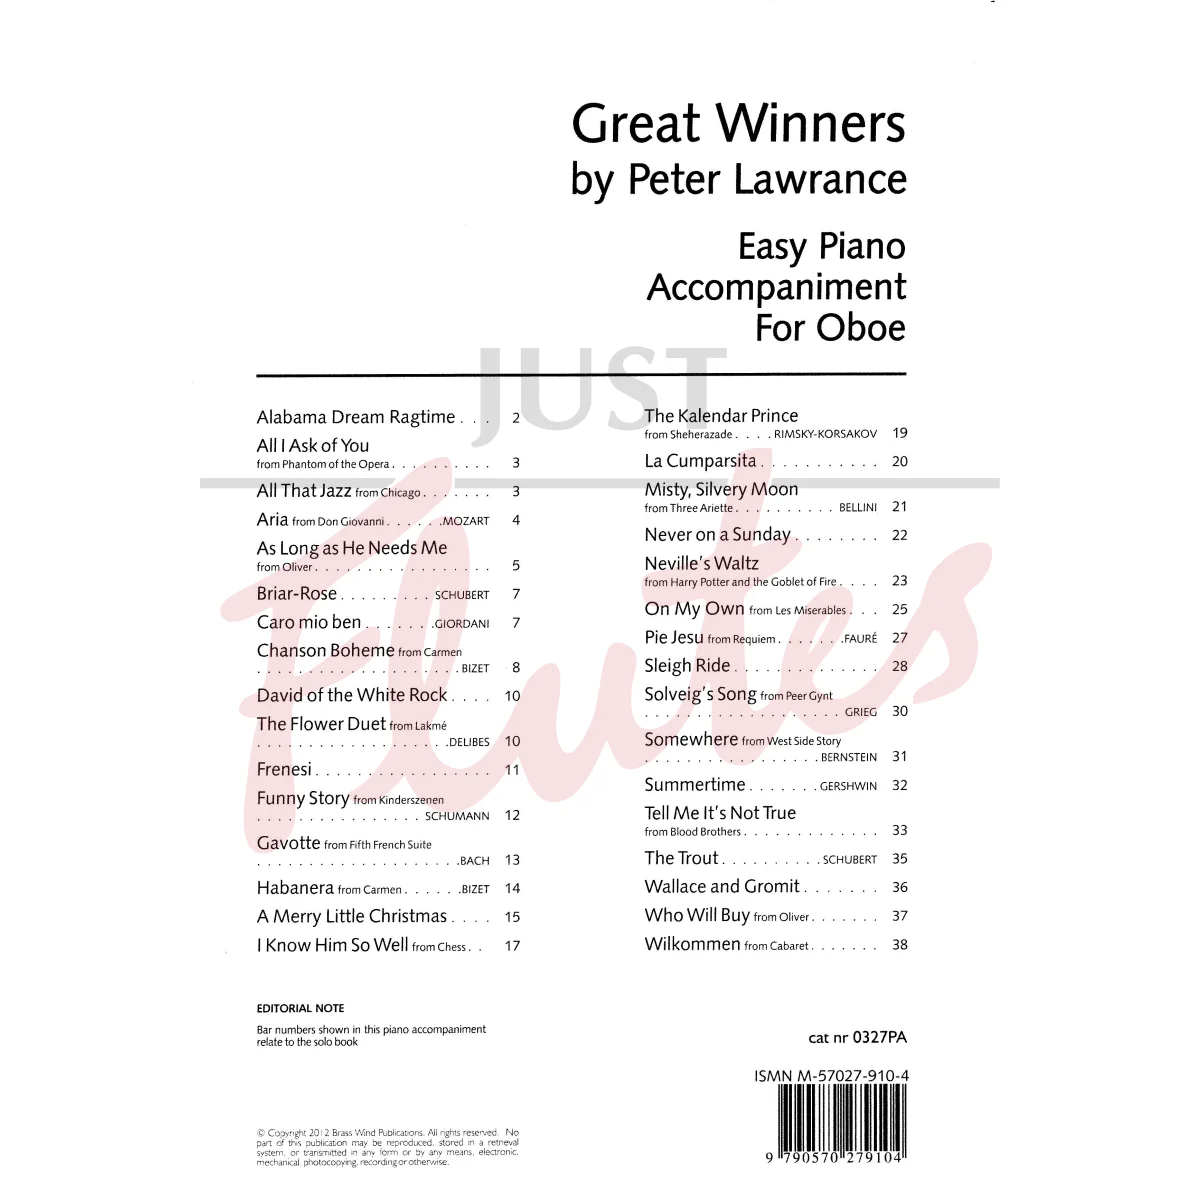 Great Winners for Oboe [Piano Accompaniment Book]